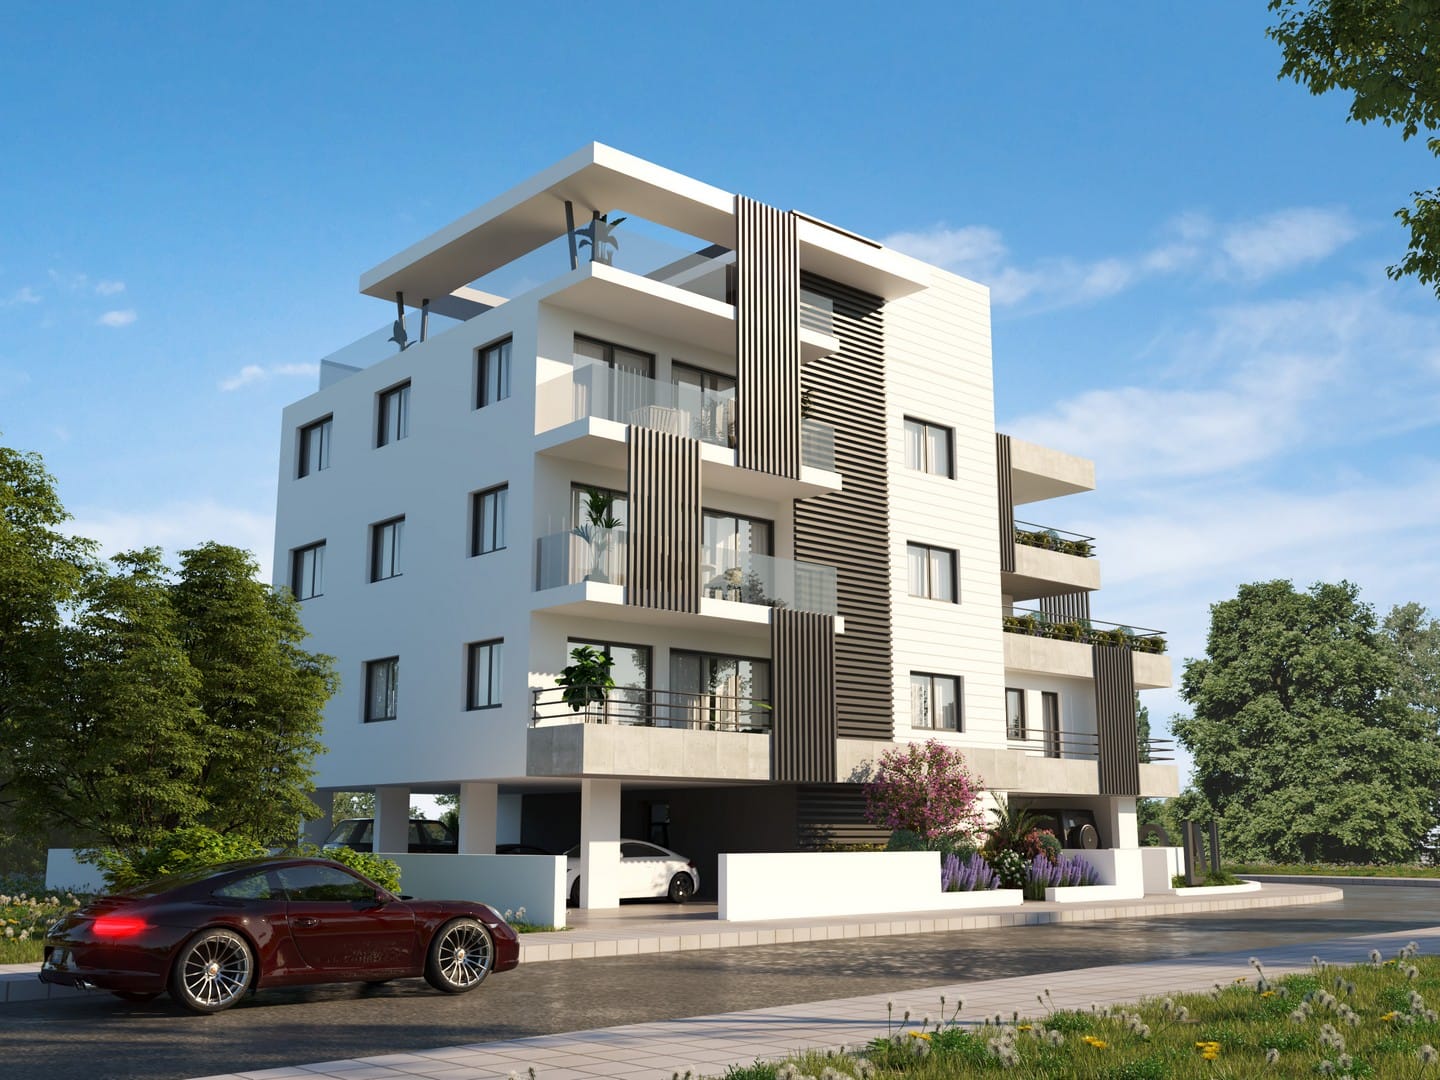 Brand New Two Bedroom Apartment for Sale in Dheryneia Area